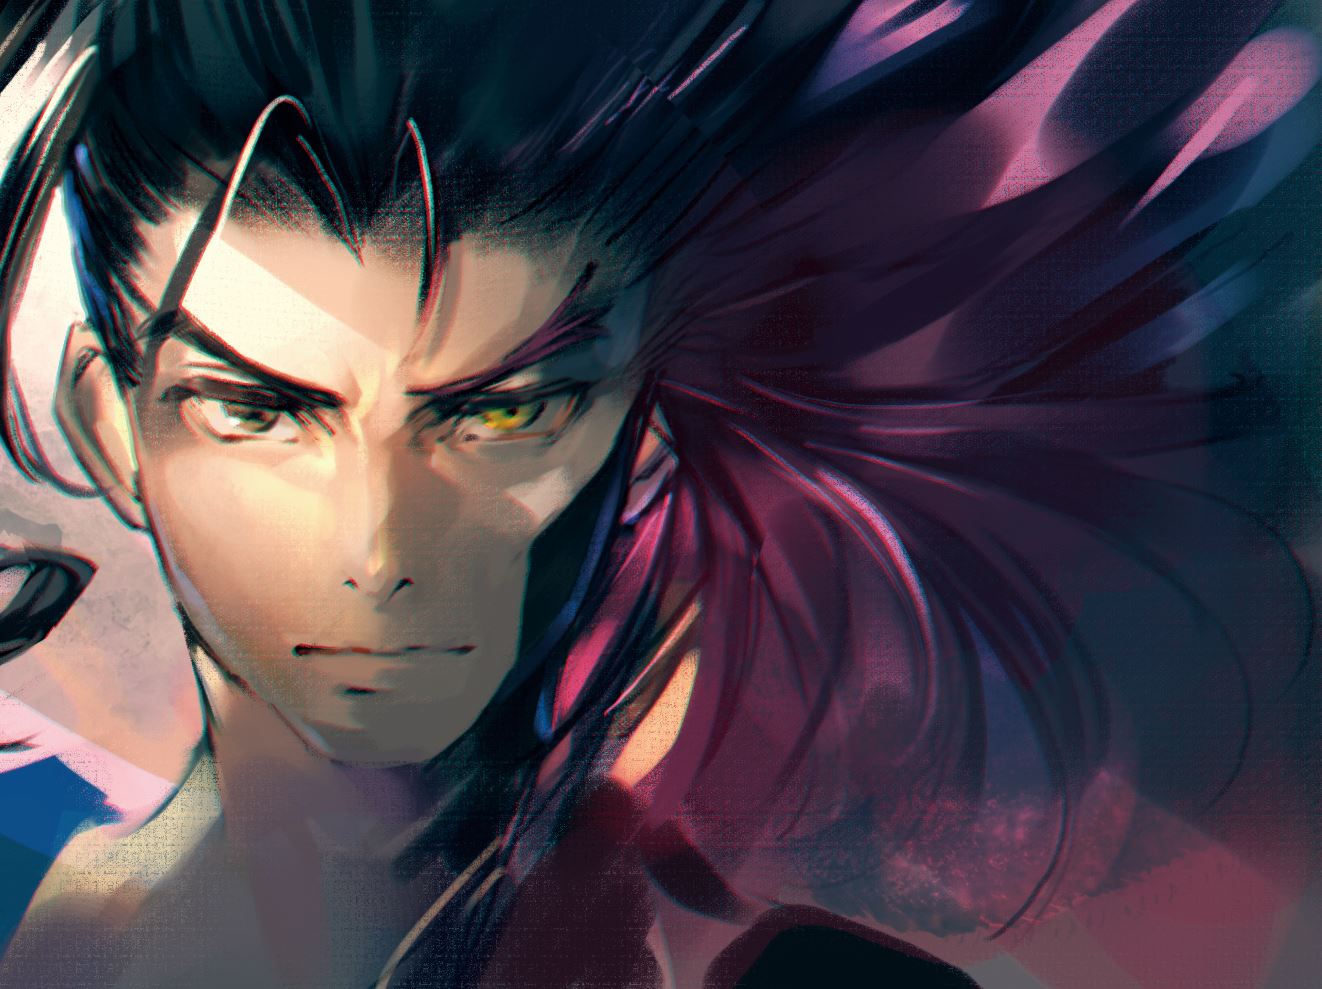 1boy black_hair bomssp close-up dual_persona face fei_fong_wong id long_hair looking_at_viewer male_focus mask redhead solo xenogears